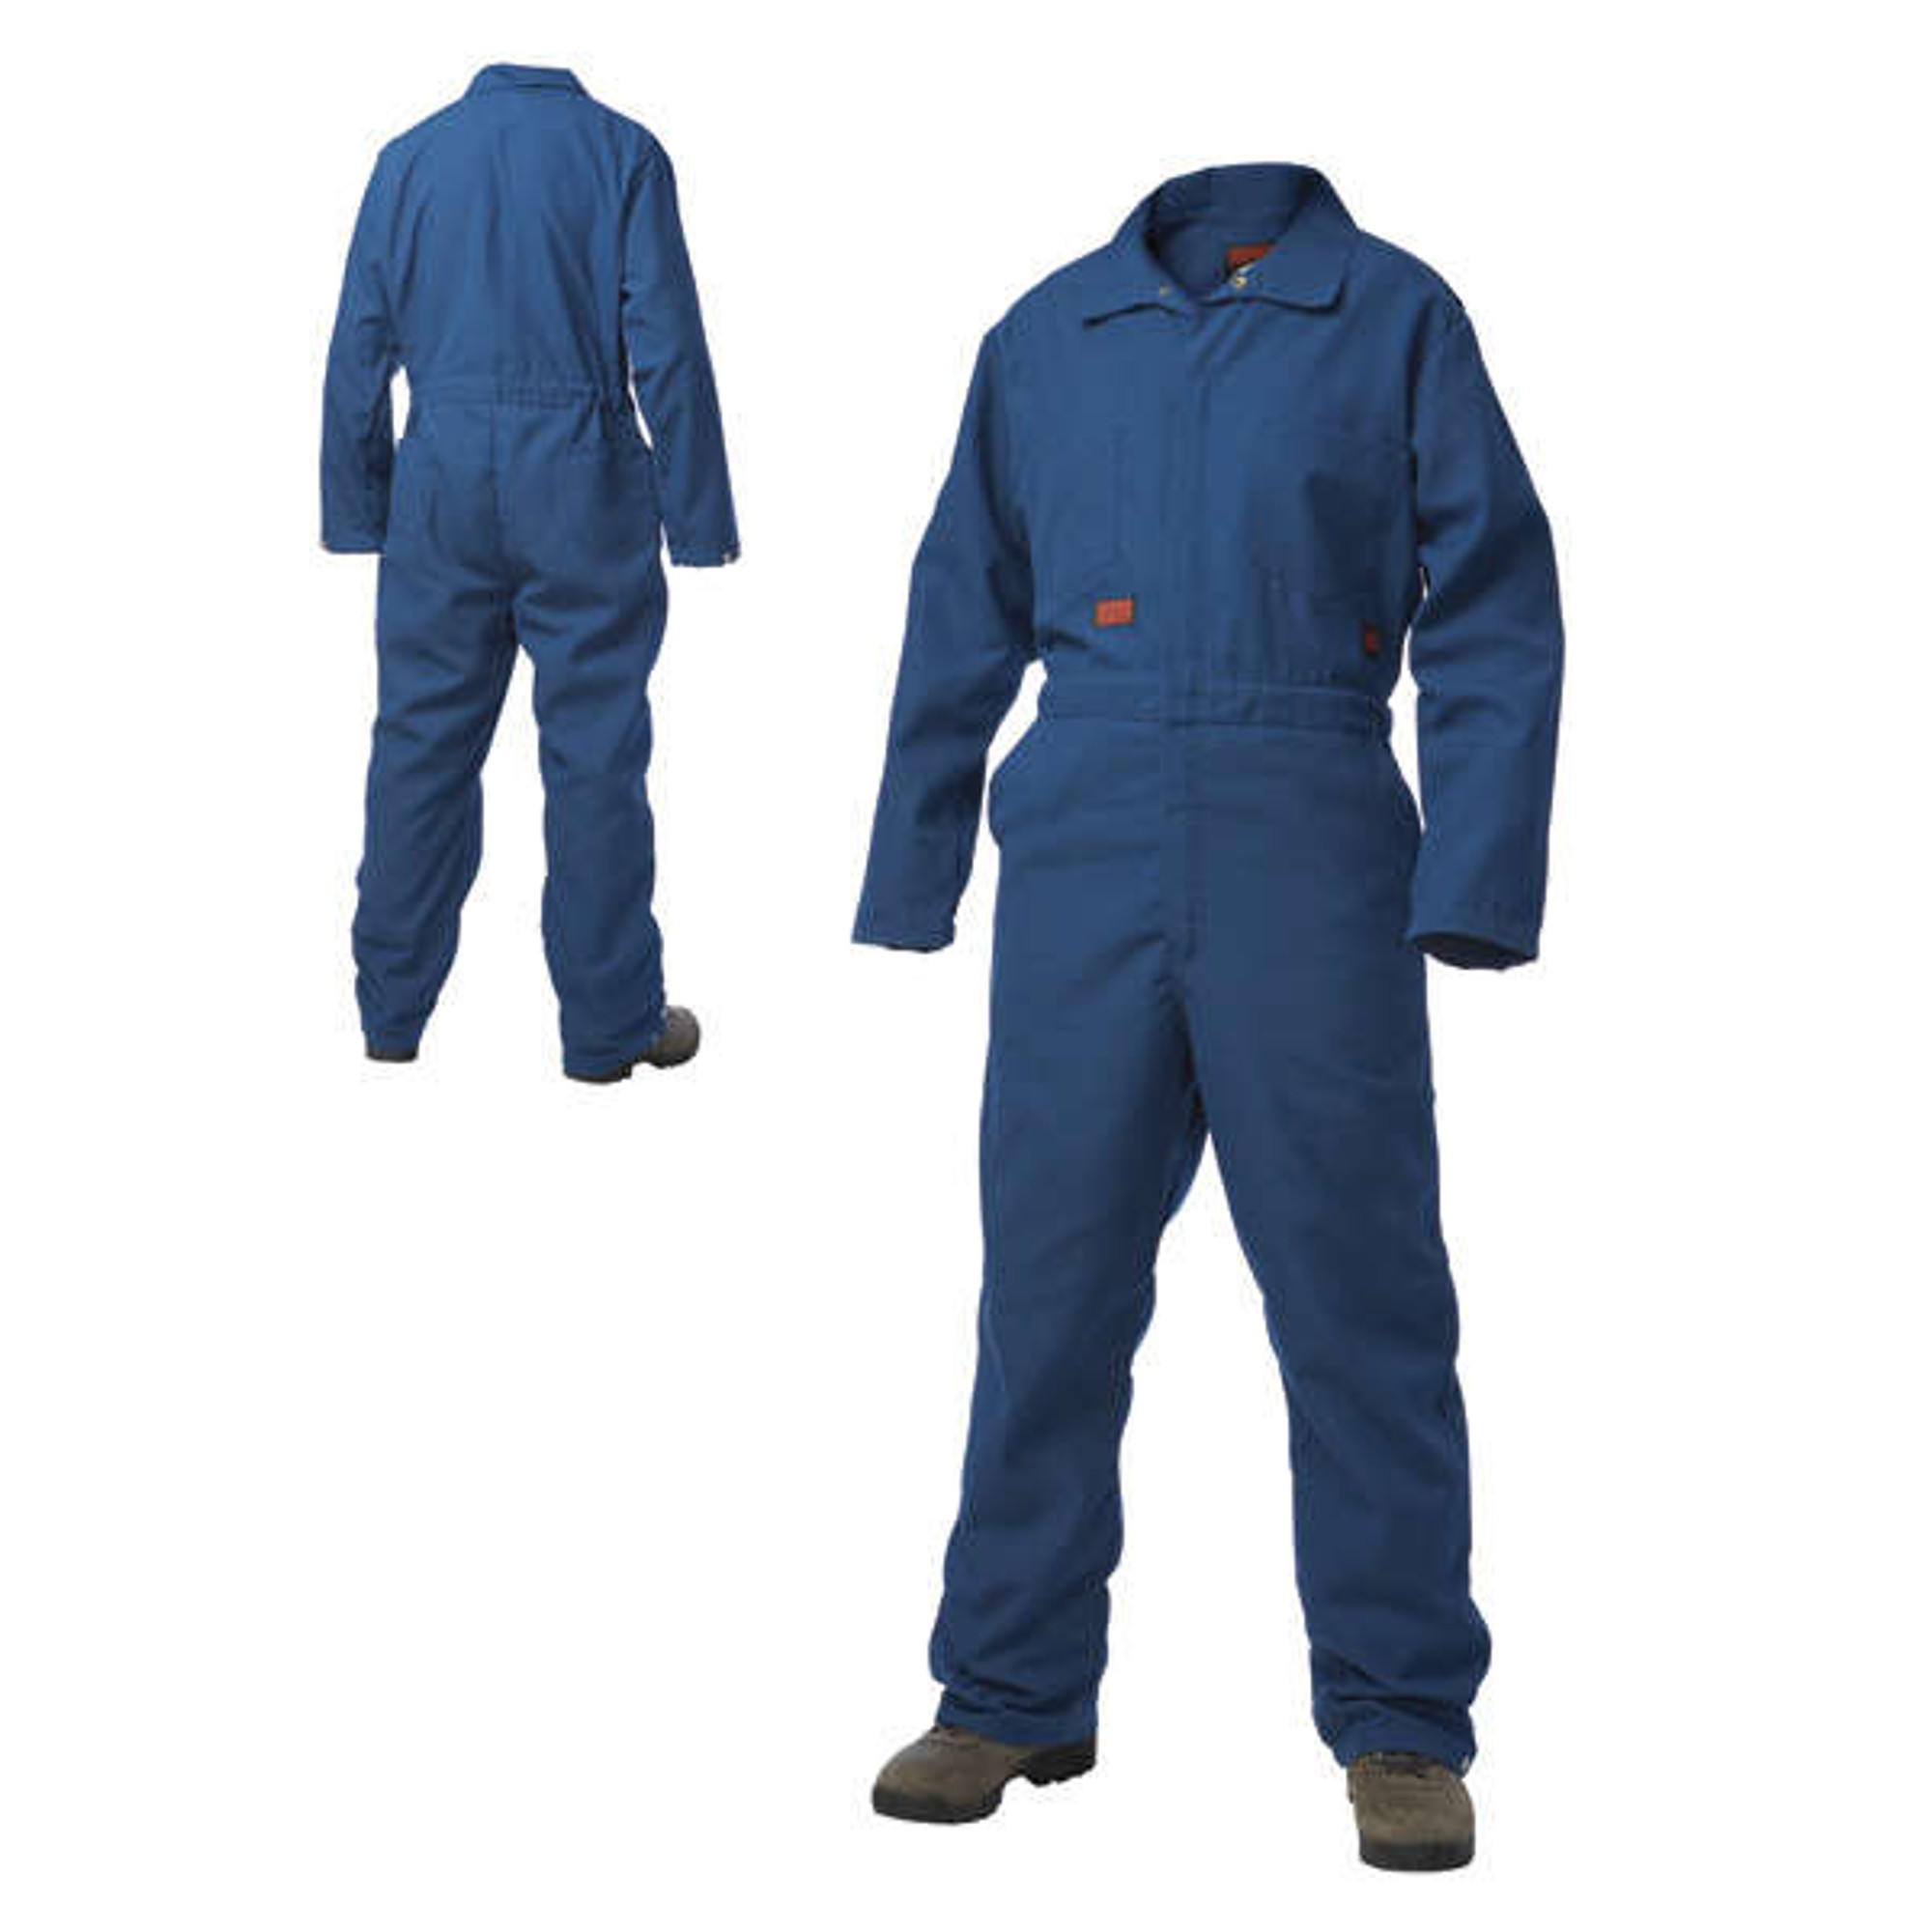 Tough Duck Flame Resistant Utility Unlined Coverall - No Stripes